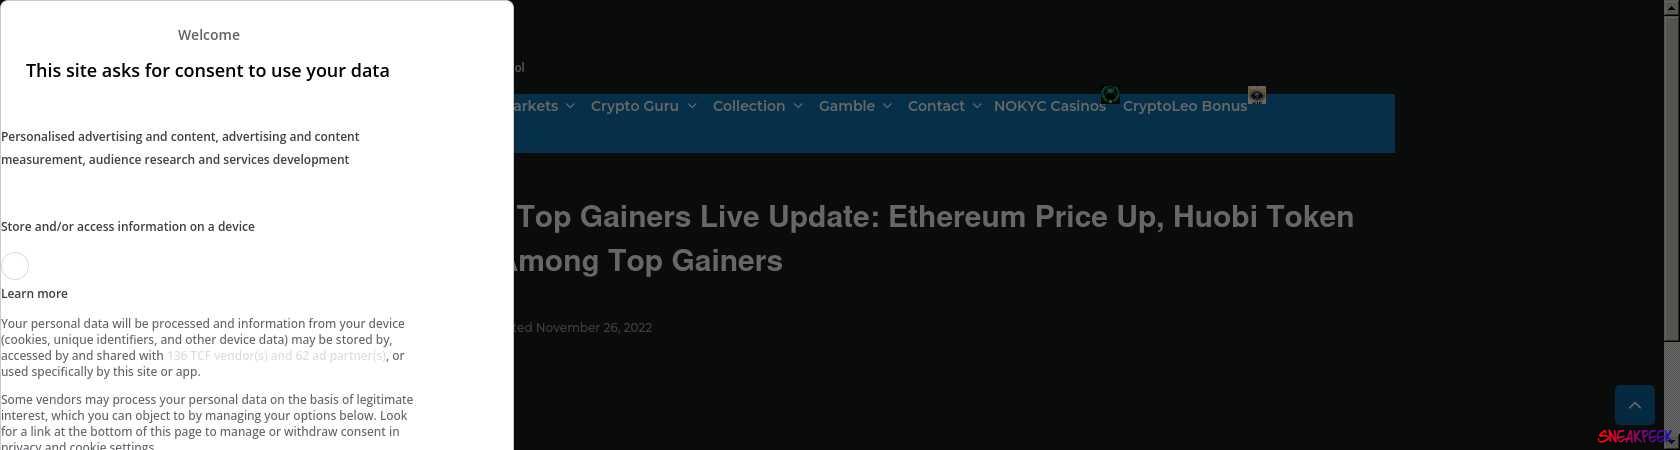 Read the full Article:  ⭲ Cryptocurrency Top Gainers Live Update: Ethereum Price Up, Huobi Token And Dogecoin Among Top Gainers